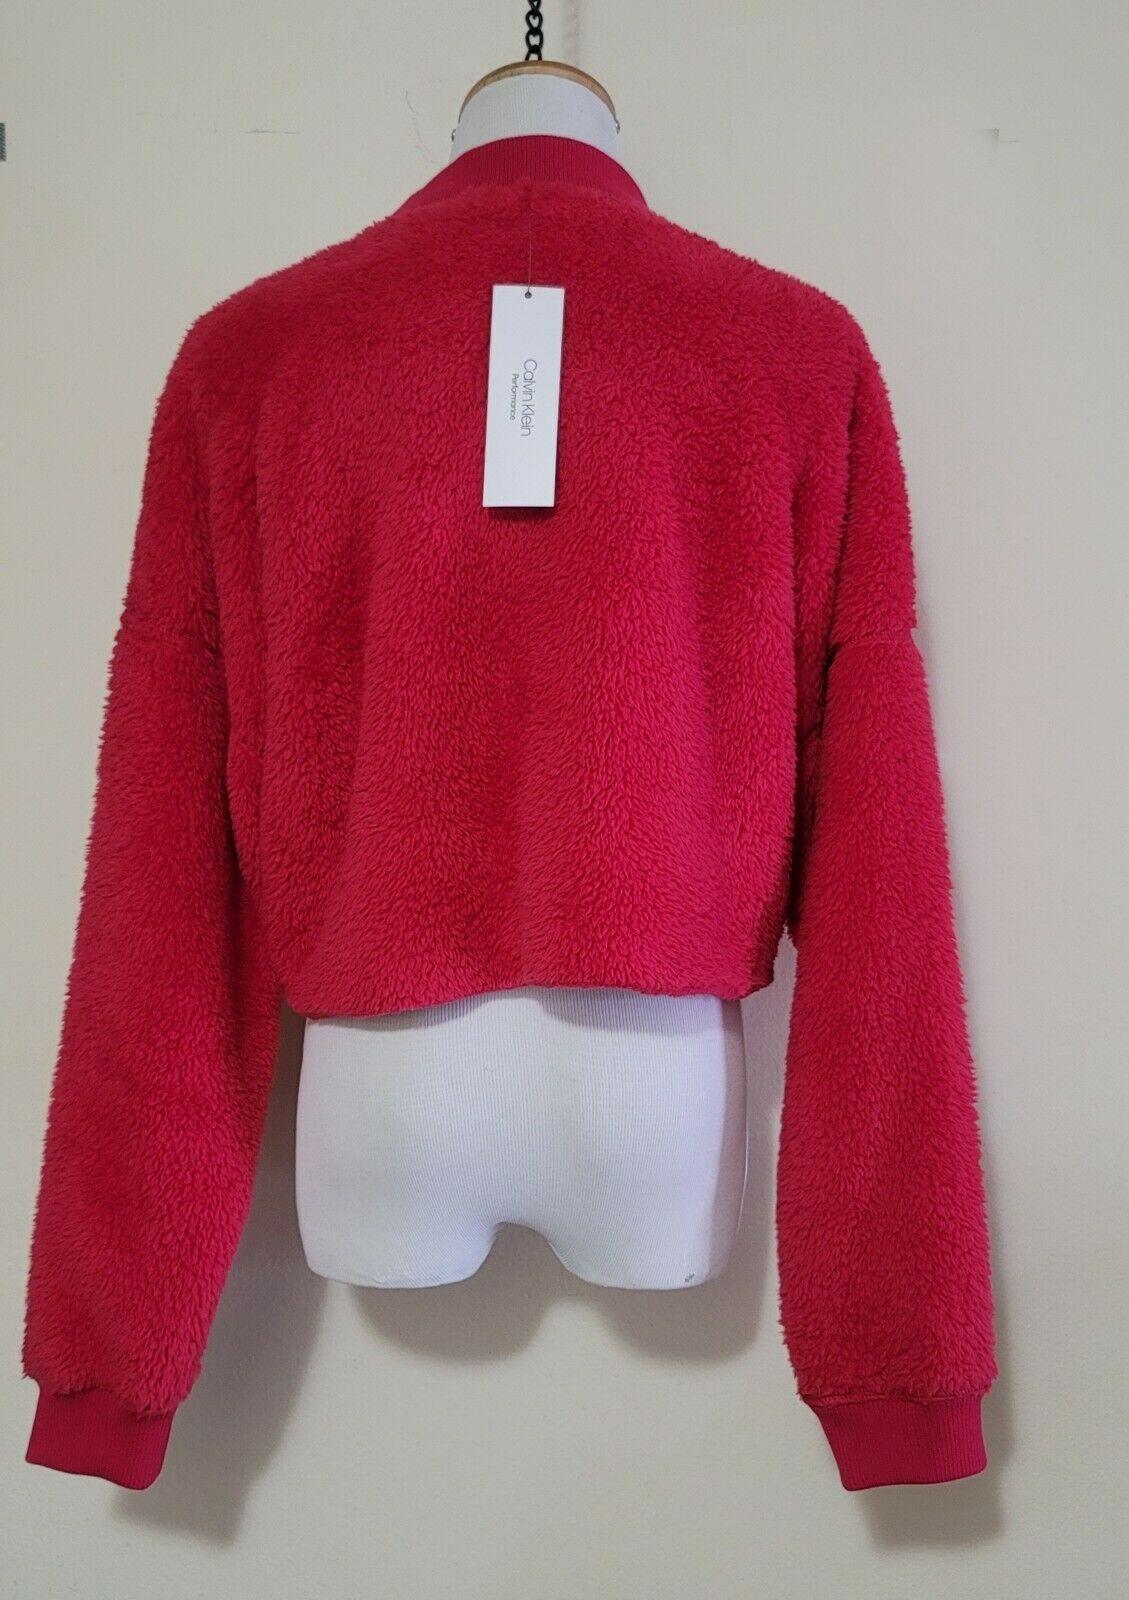 Calvin Klein Performance Women's Faux-Sherpa Cropped Raspberry Pullover Top Size S - SVNYFancy